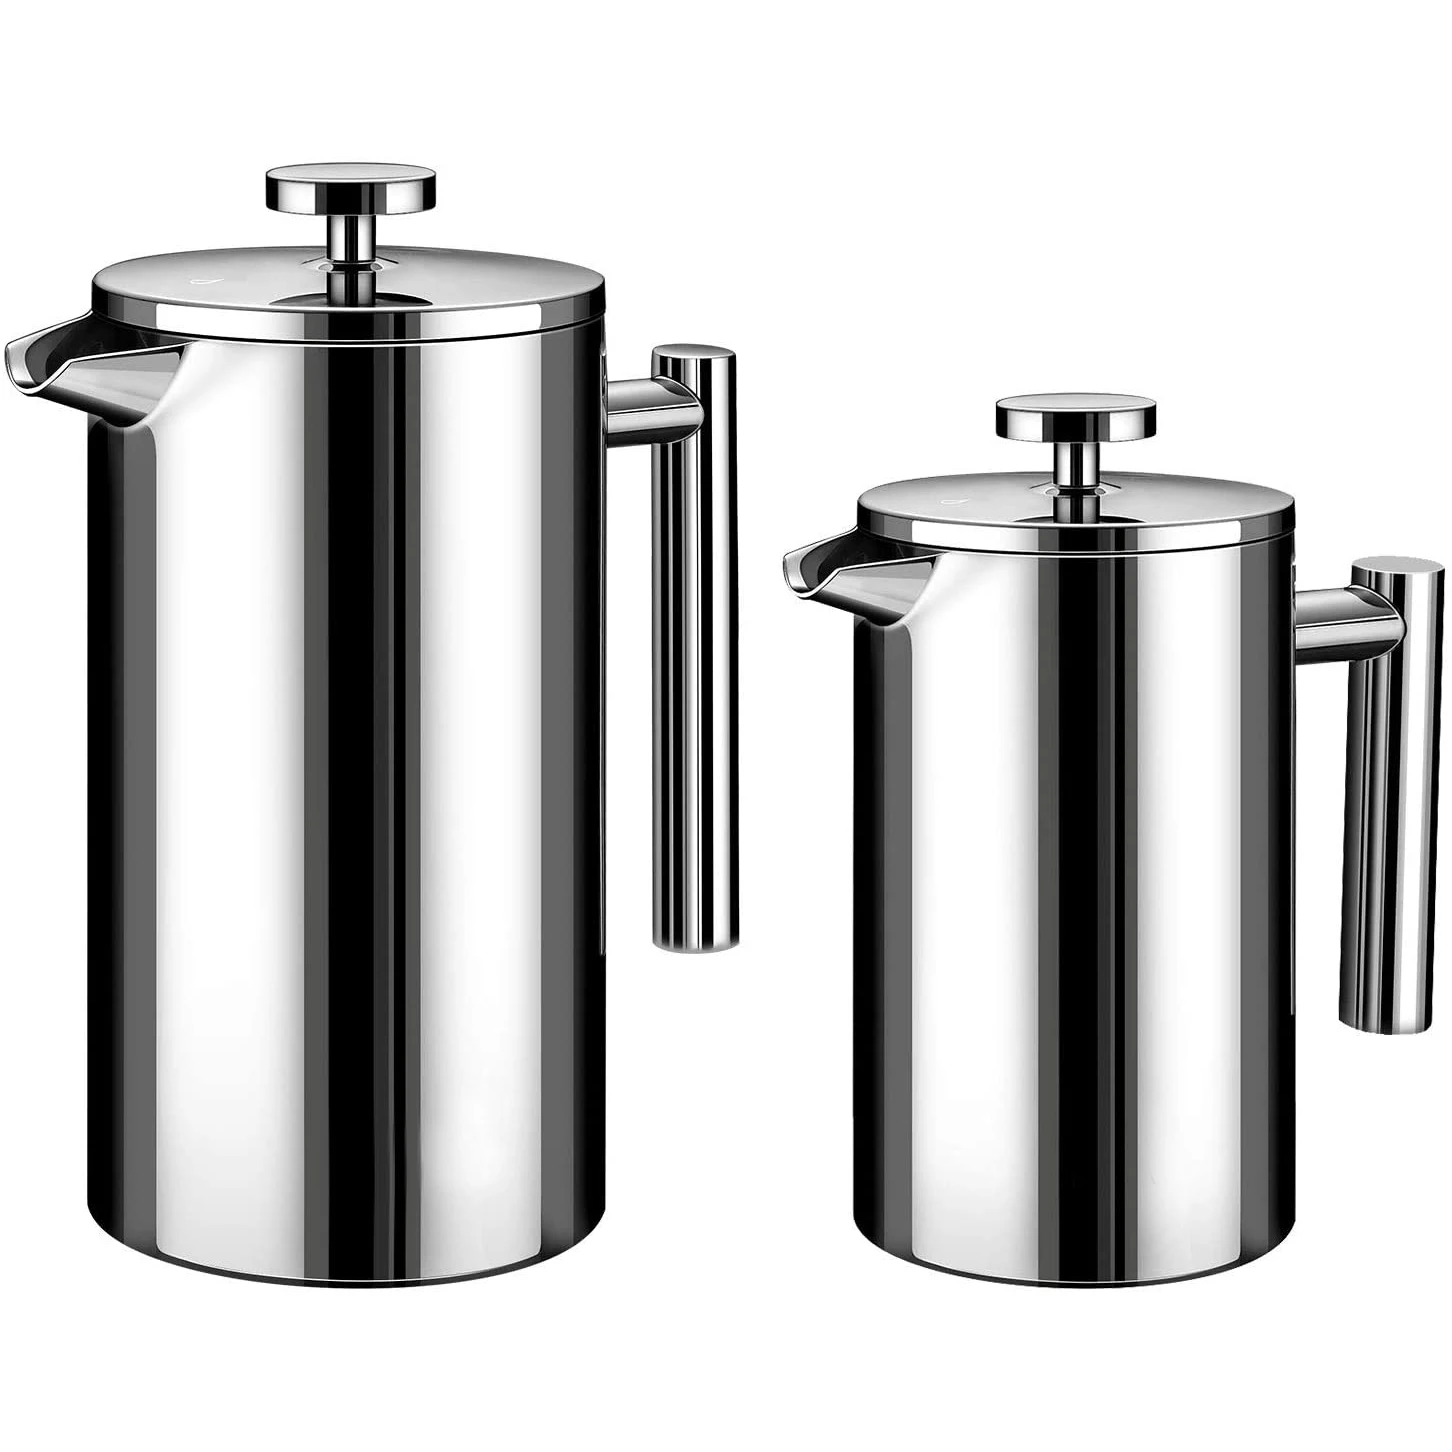 

Wholesale Cafetera Italiana Cafetiere Logo Vacuum Double Wall Pot Tea Milk 18/10 Stainless Steel Coffee Maker French Press, Silver, black, customizable